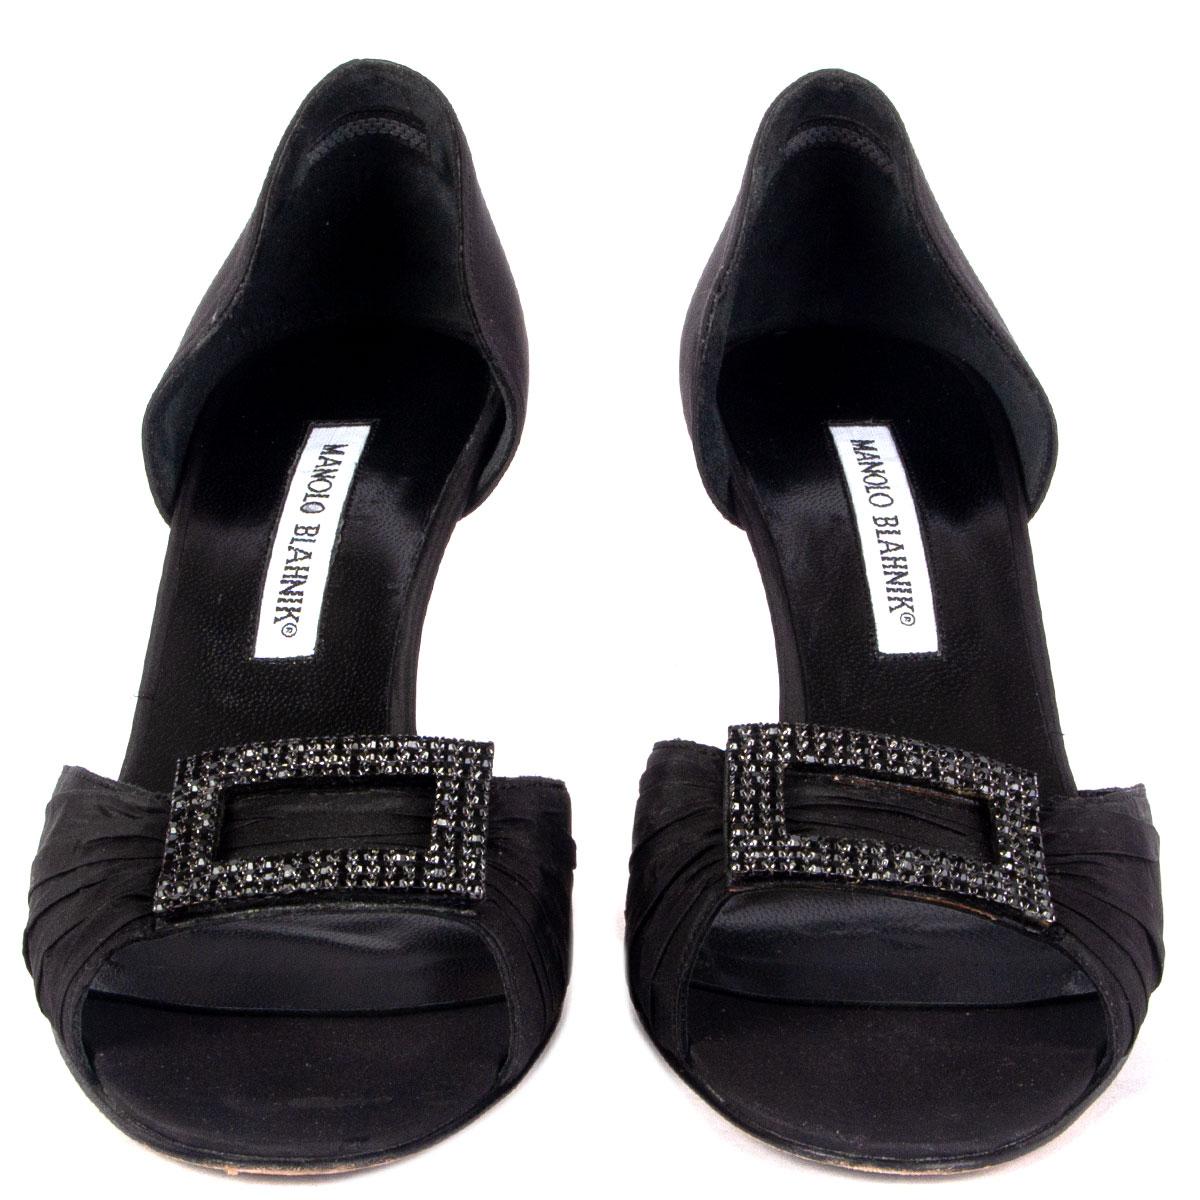 100% authentic Manolo Blahnik sandals in black silk embellished with rhinestone buckle. Have been worn and are in excellent condition. 

Measurements
Imprinted Size	38
Shoe Size	38
Inside Sole	25cm (9.8in)
Width	7.5cm (2.9in)
Heel	7.5cm (2.9in)

All